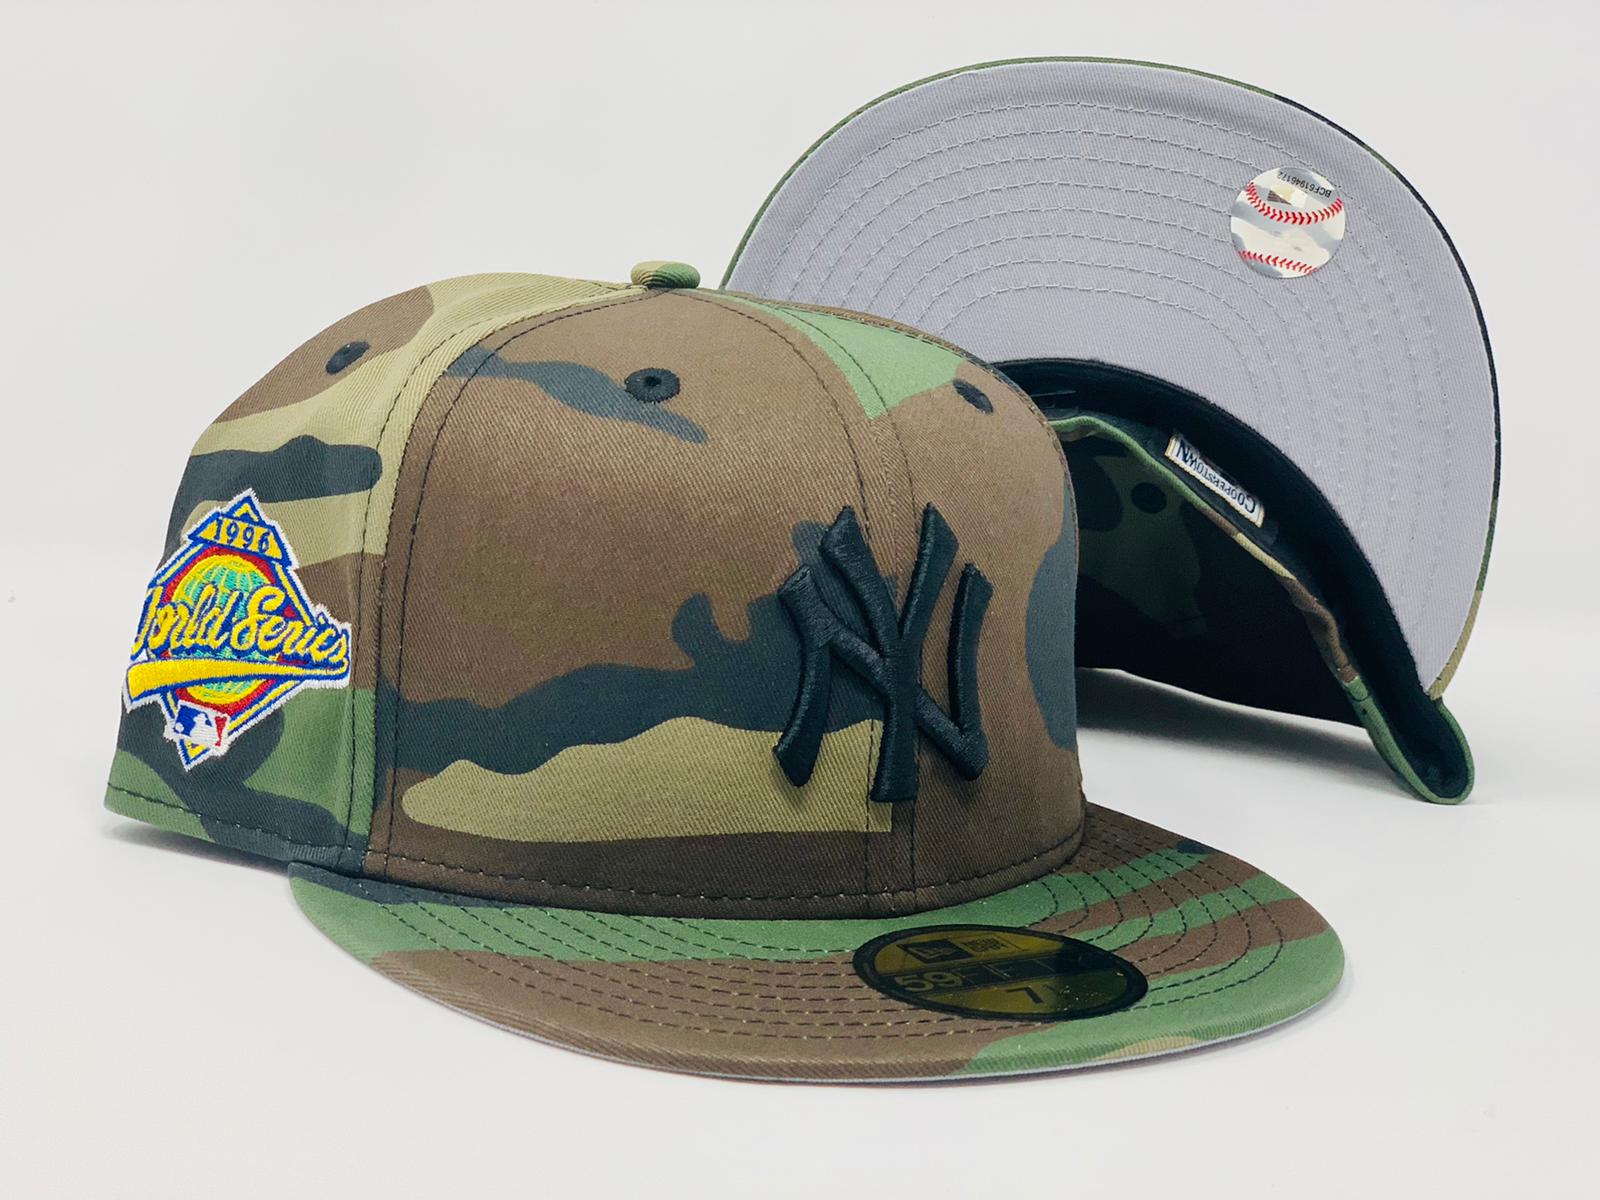 Chase Whitley Hat - NY Yankees Memorial Day 2014 Game Used #39 Camo Hat  (EK871812) (Size 7 1/2)